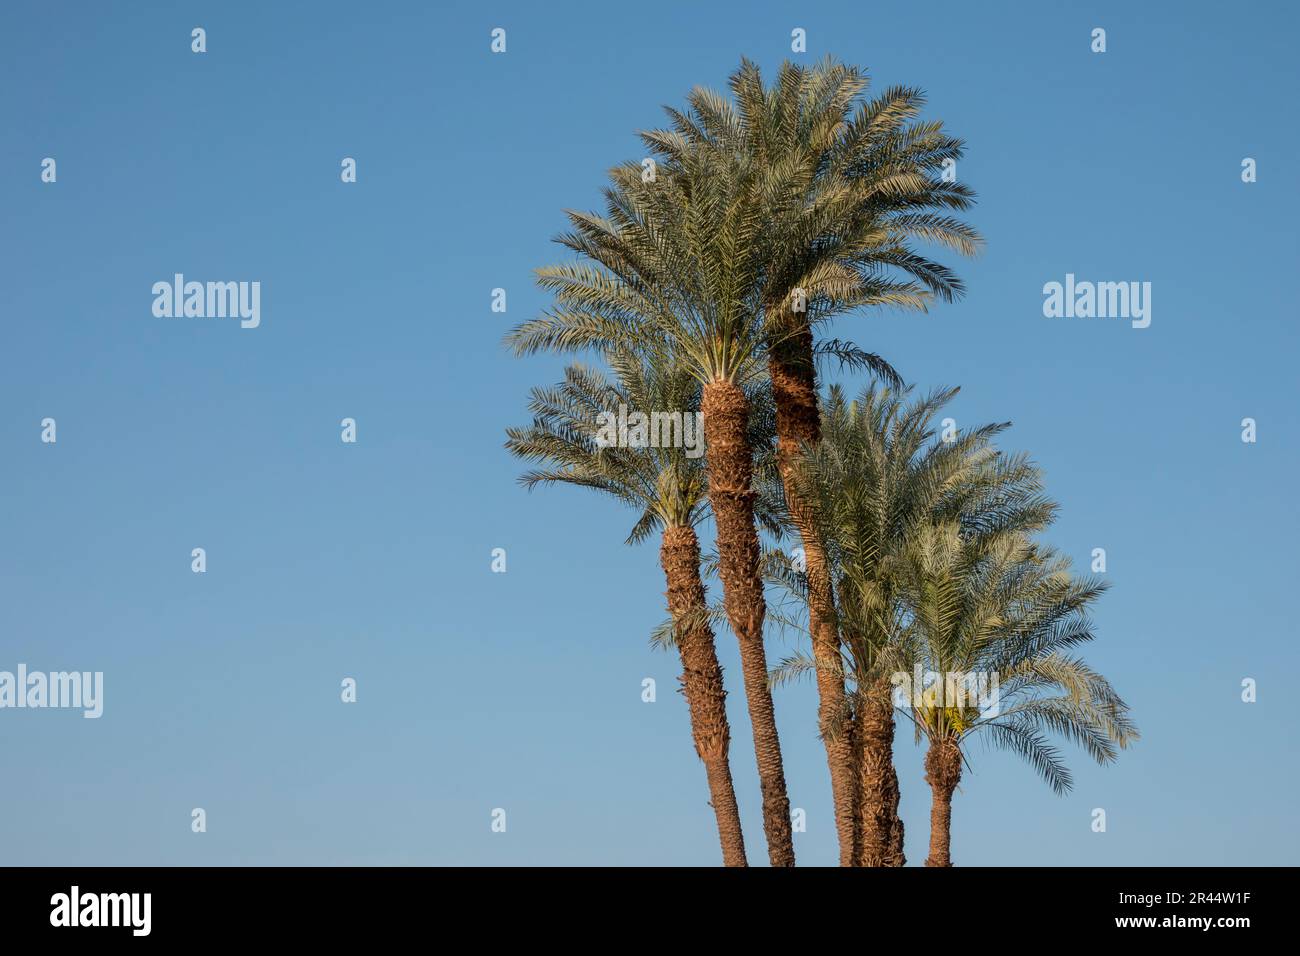 A small group of date palms against a clear blue sky Stock Photo